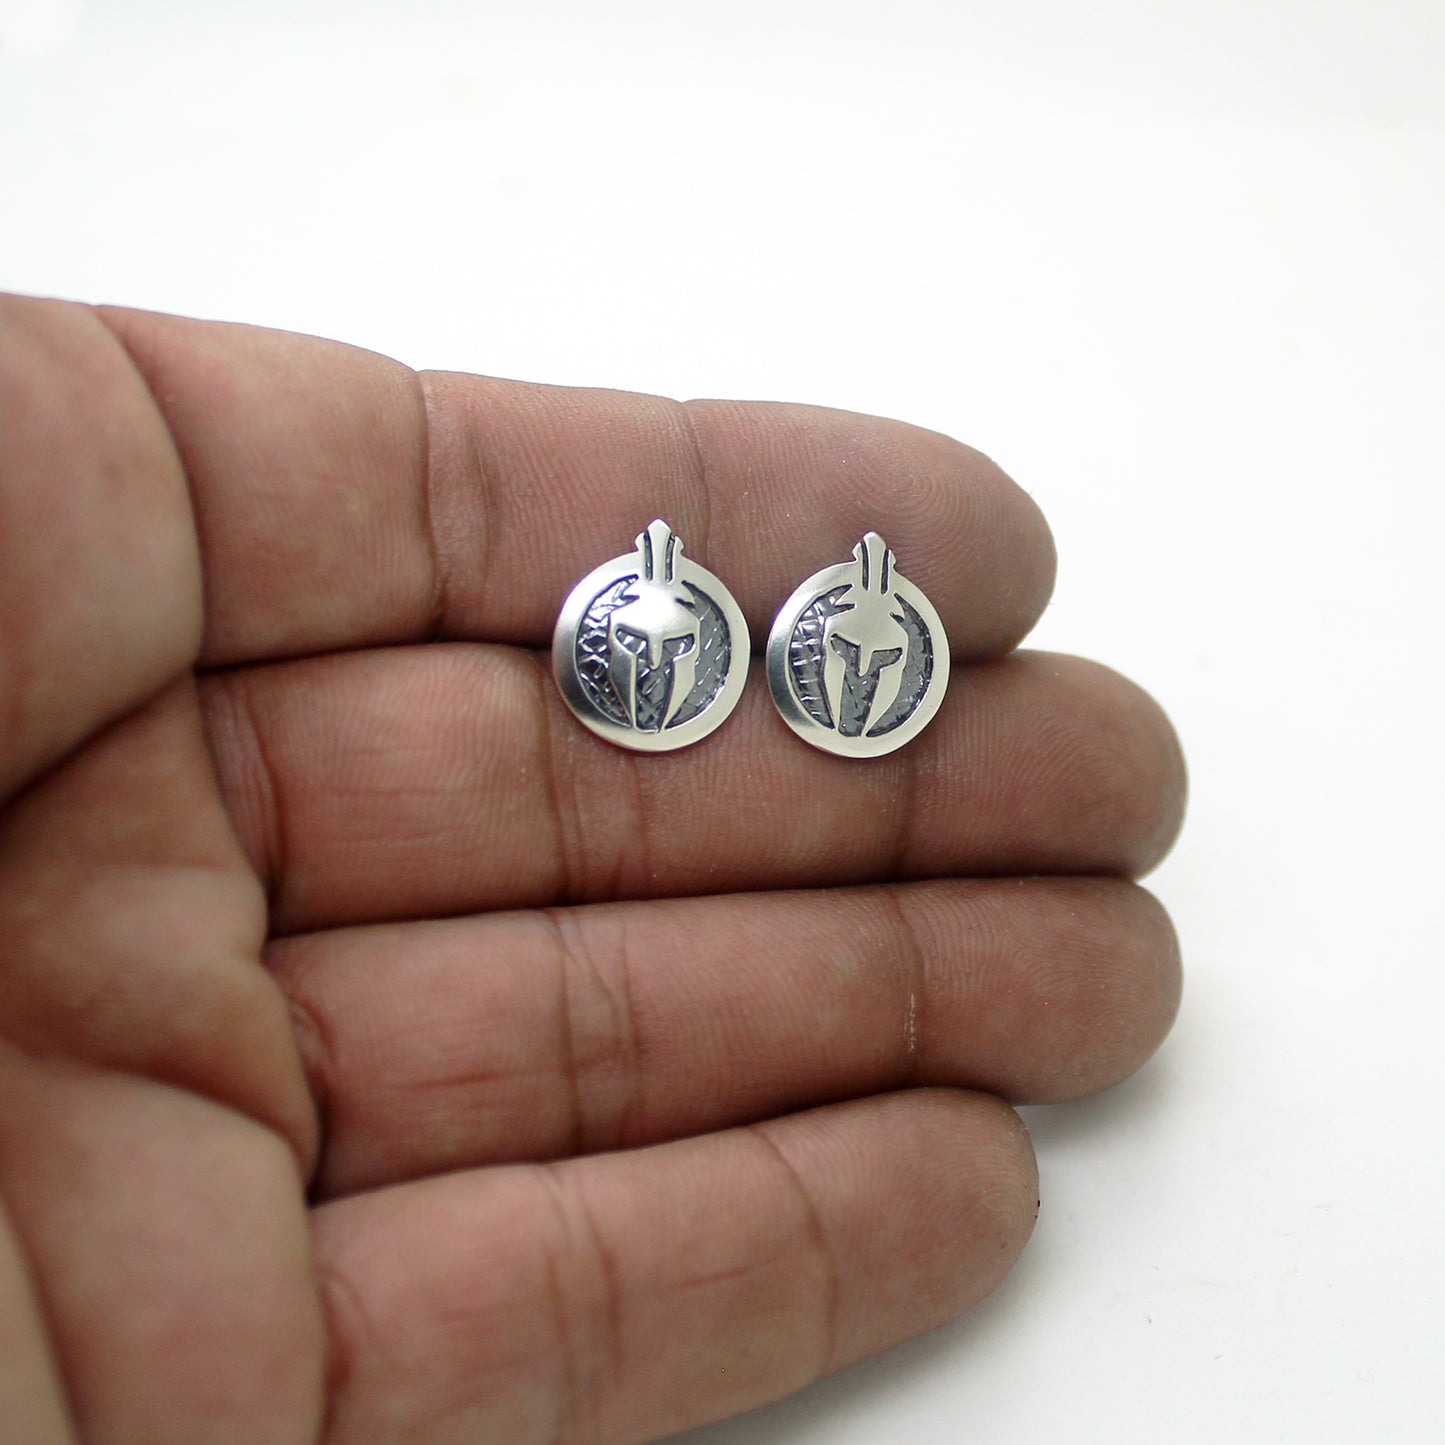 Assassin's Creed Odyssey inspiration earrings in 925 silver